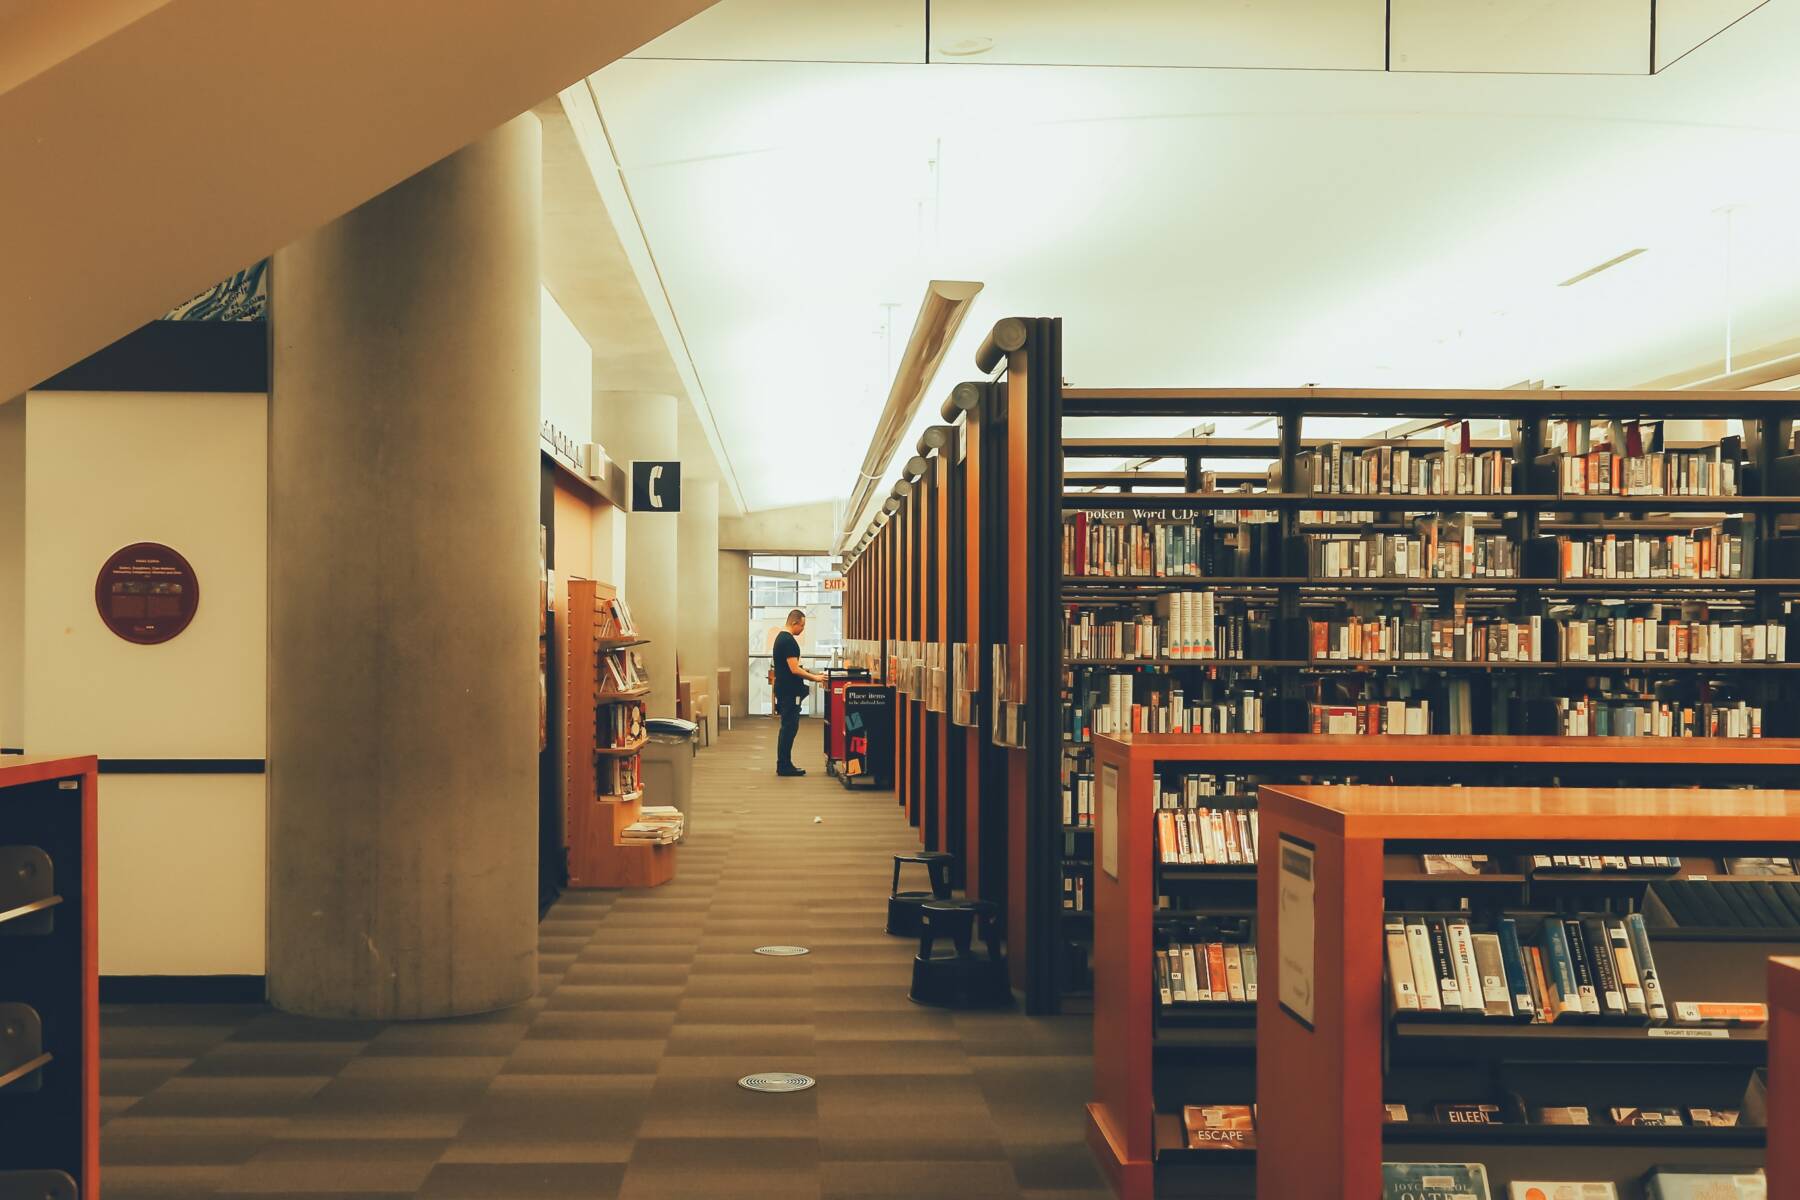 Photo of the library consisting of many book shelves, a phone call area, and a person looking for books